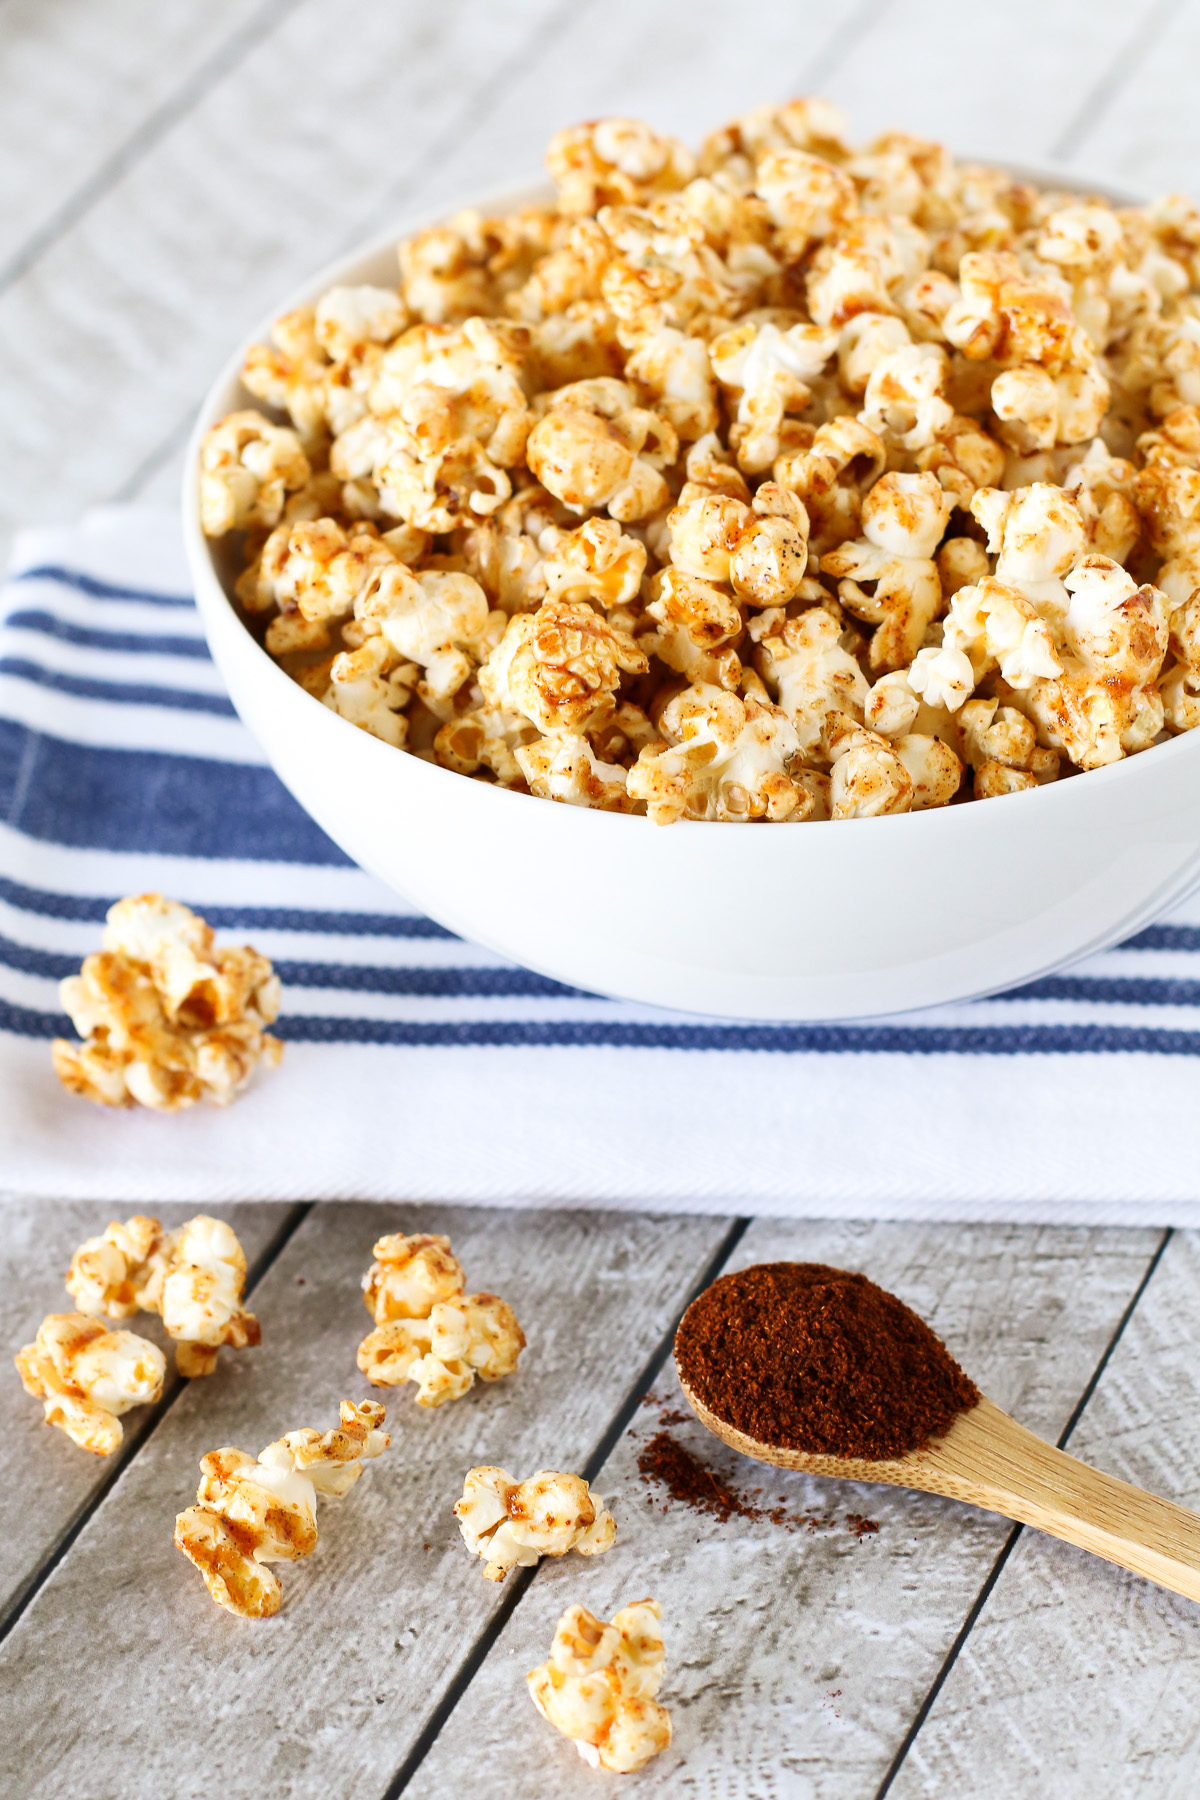 Smokey Maple Popcorn. Made with pure maple syrup, coconut oil and smokey spices, this popcorn is totally addicting!